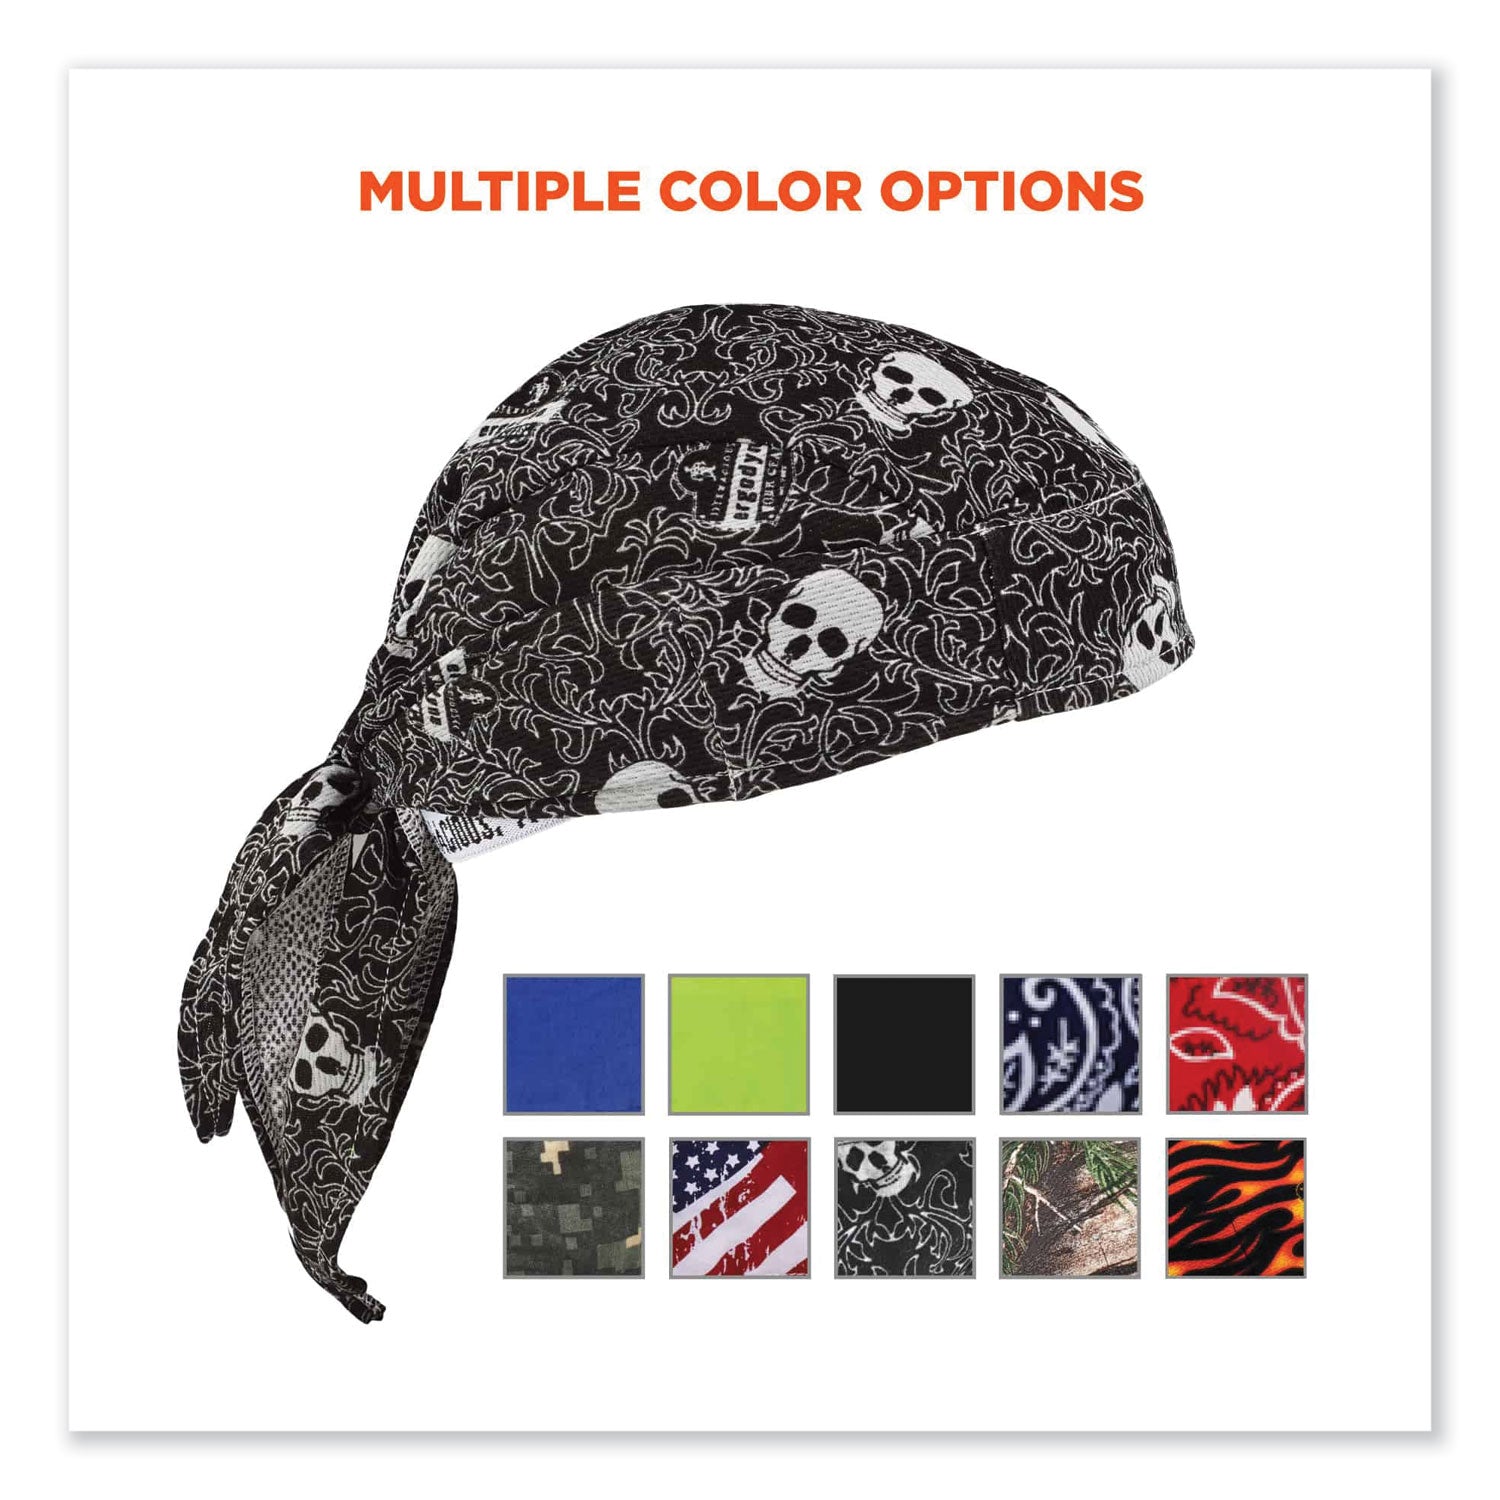 chill-its-6615-high-performance-bandana-doo-rag-with-terry-cloth-sweatband-one-size-skulls-ships-in-1-3-business-days_ego12519 - 5